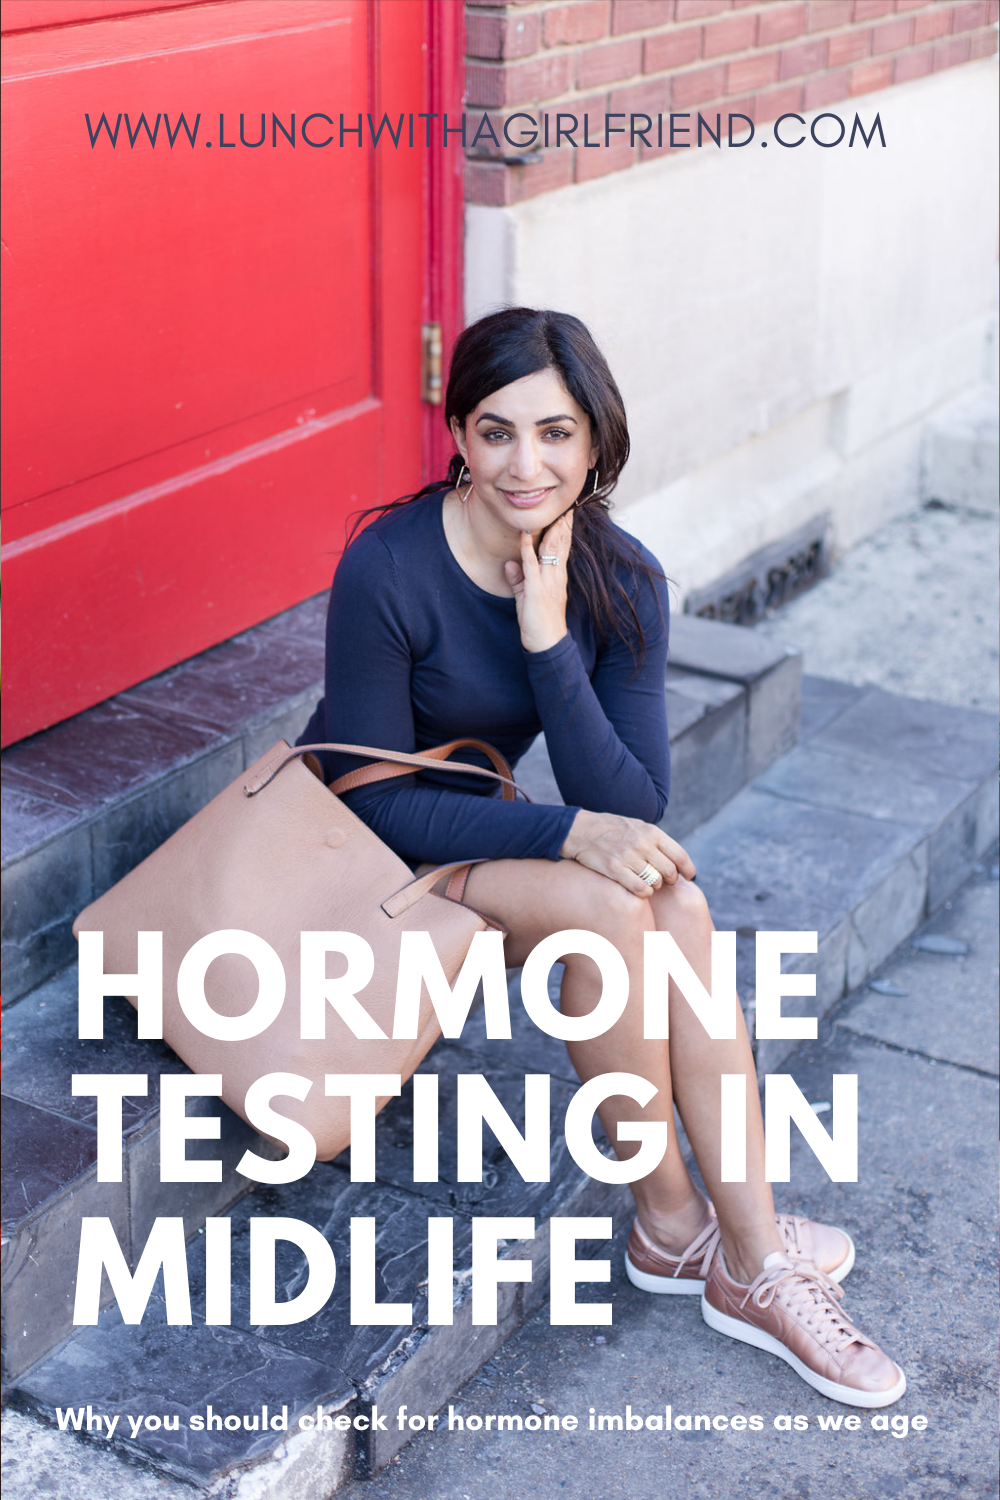 Why You Should Check For A Hormone Imbalance In Midlife